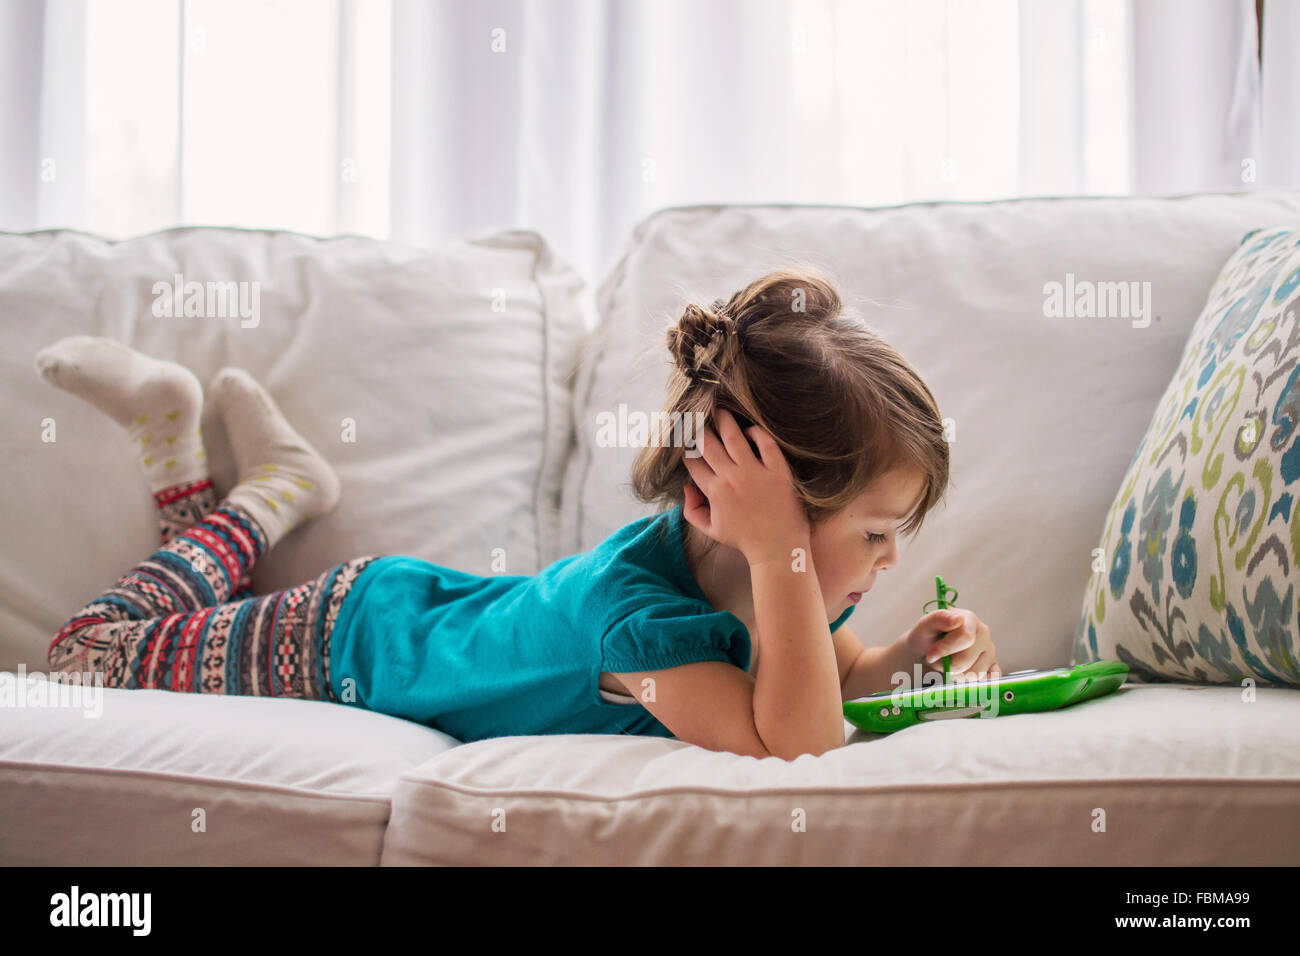 Girl lying on couch Playing with digital tablet Banque D'Images